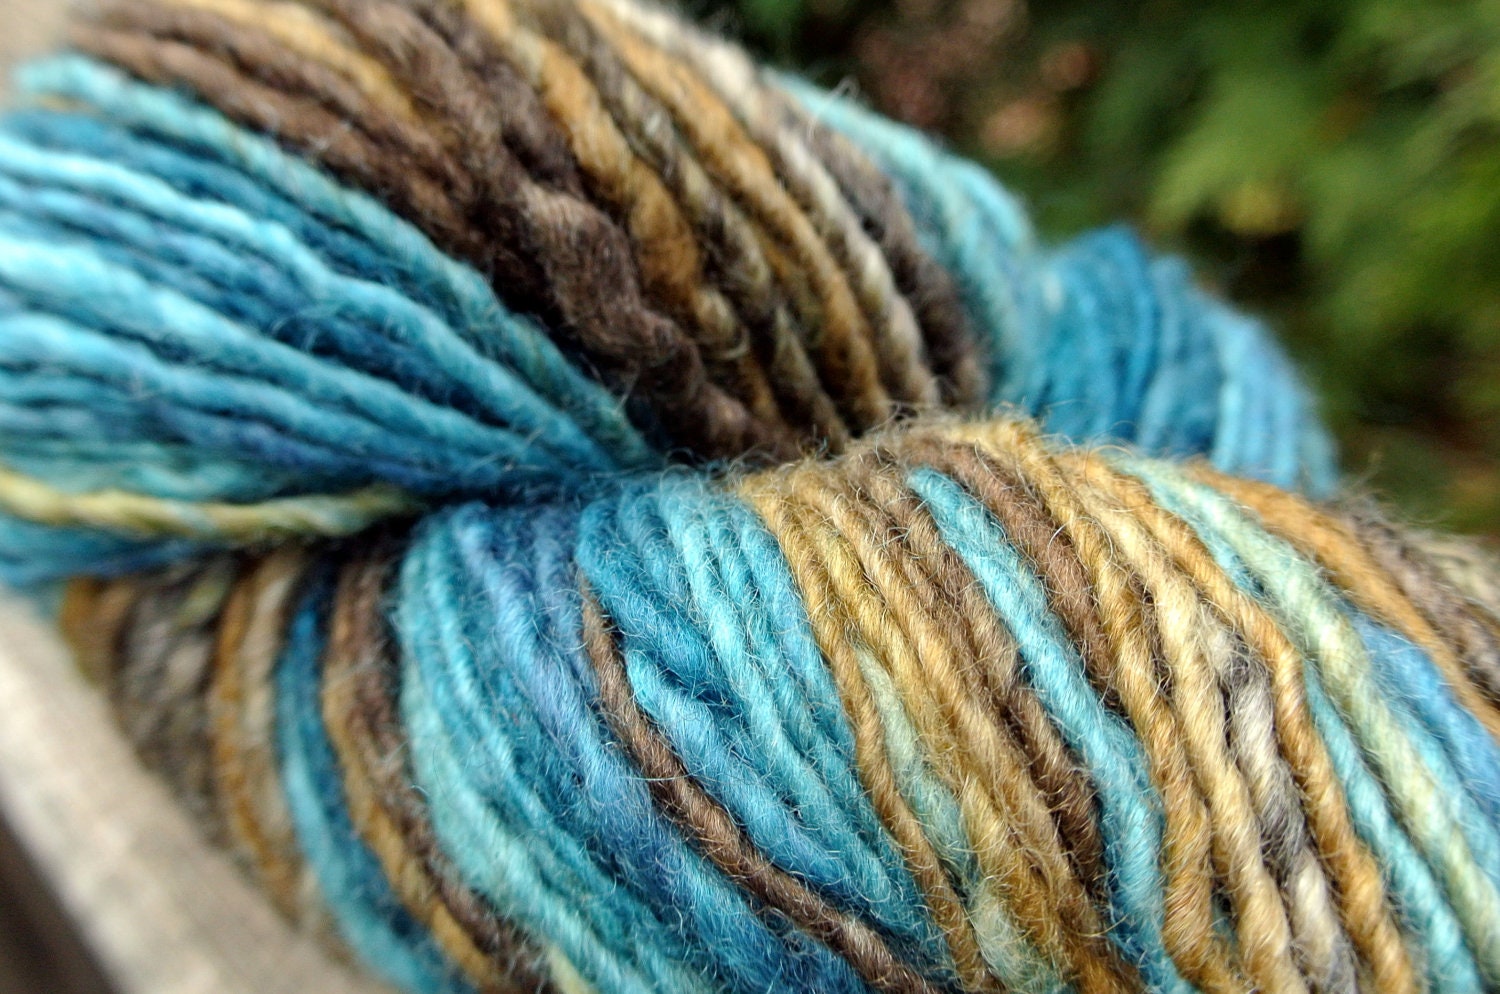 SALE Black Friday/Cyber Monday- Handspun Yarn, Bluefaced Leicester-Silk Worsted Weight Singles: Oceanic, Blues-Browns, Self Striping - KnitMomWi